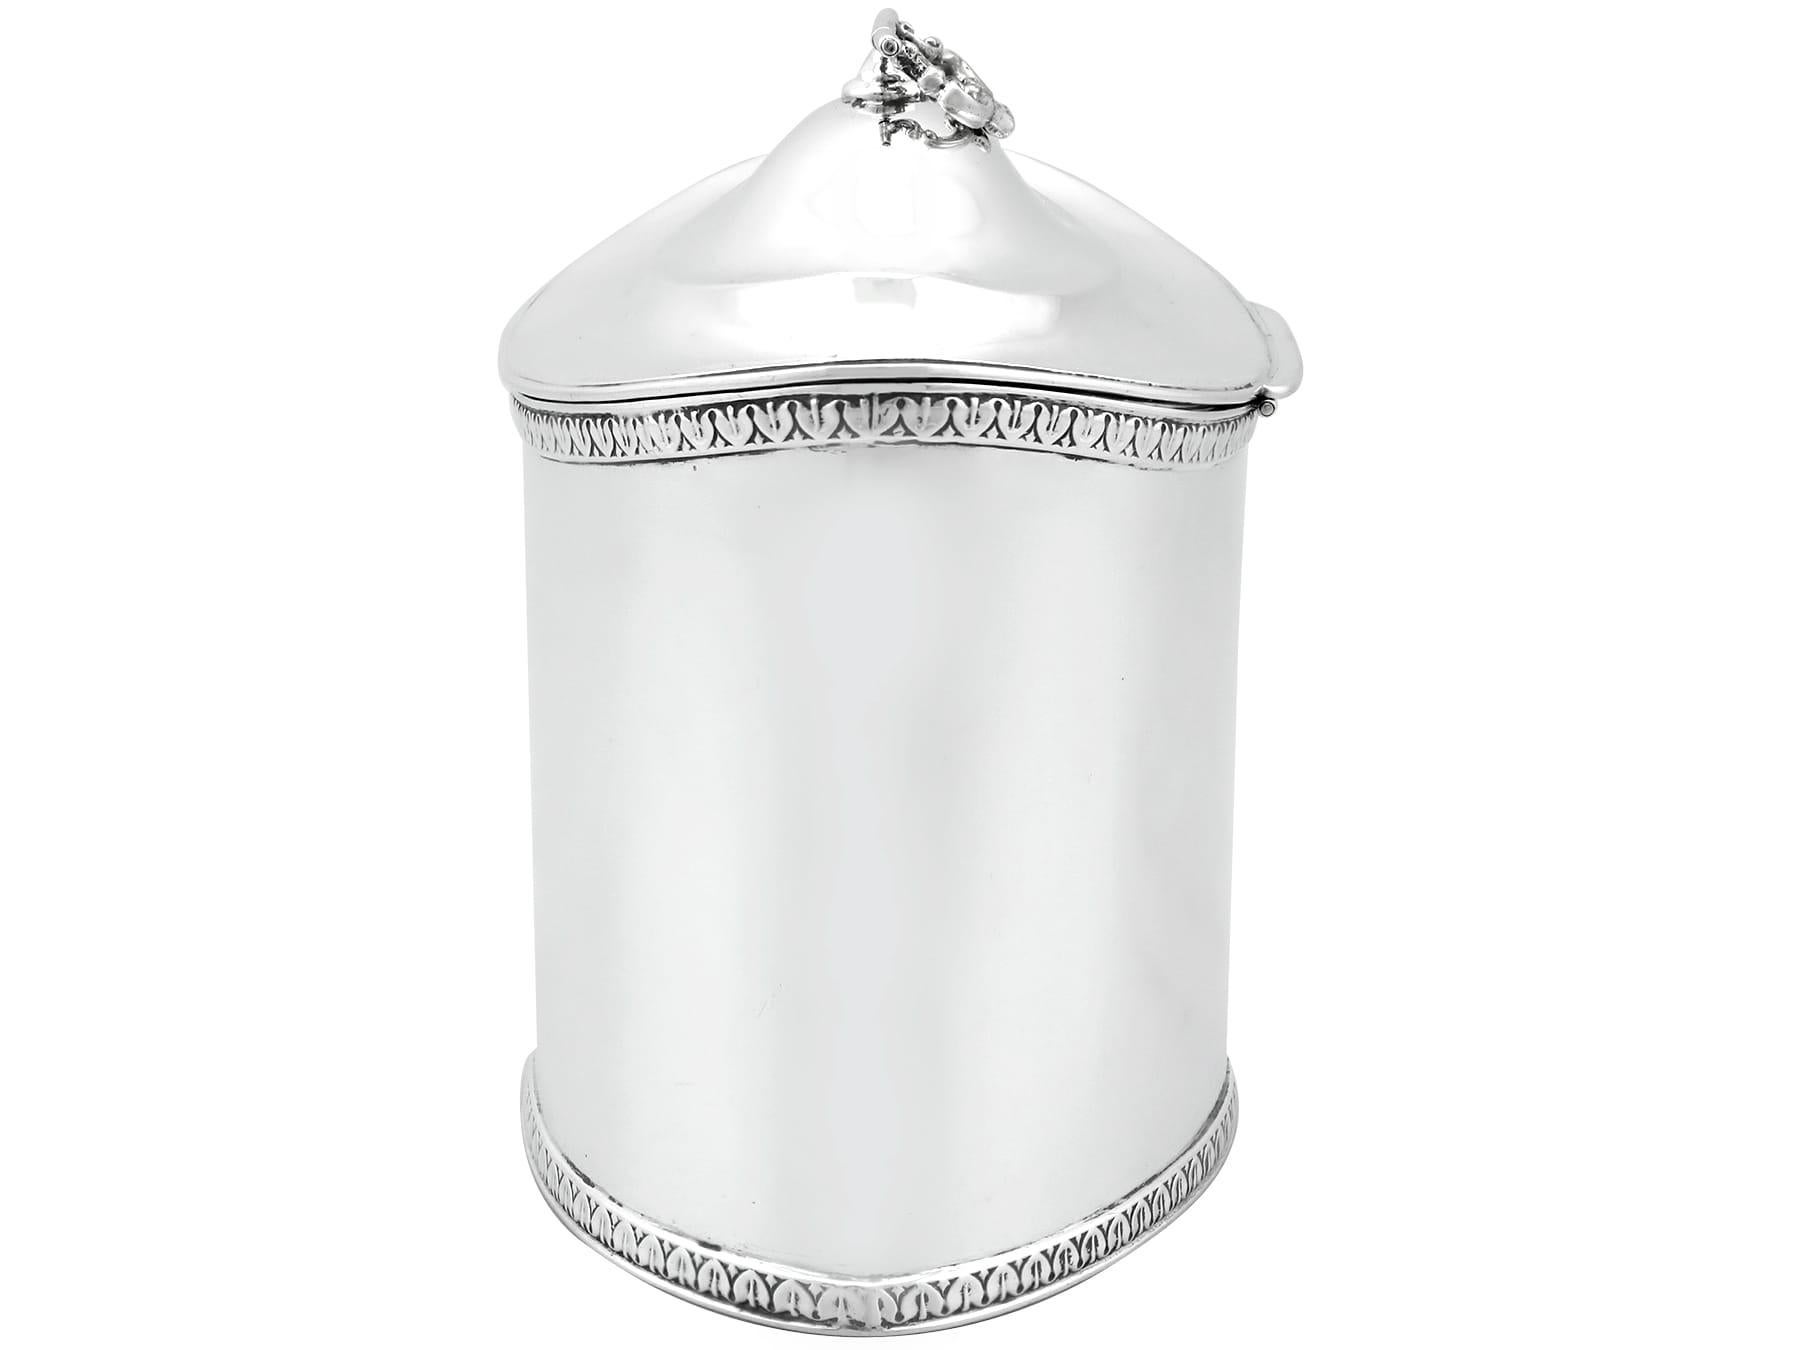 Antique Edwardian Sterling Silver Tea Caddy In Excellent Condition For Sale In Jesmond, Newcastle Upon Tyne